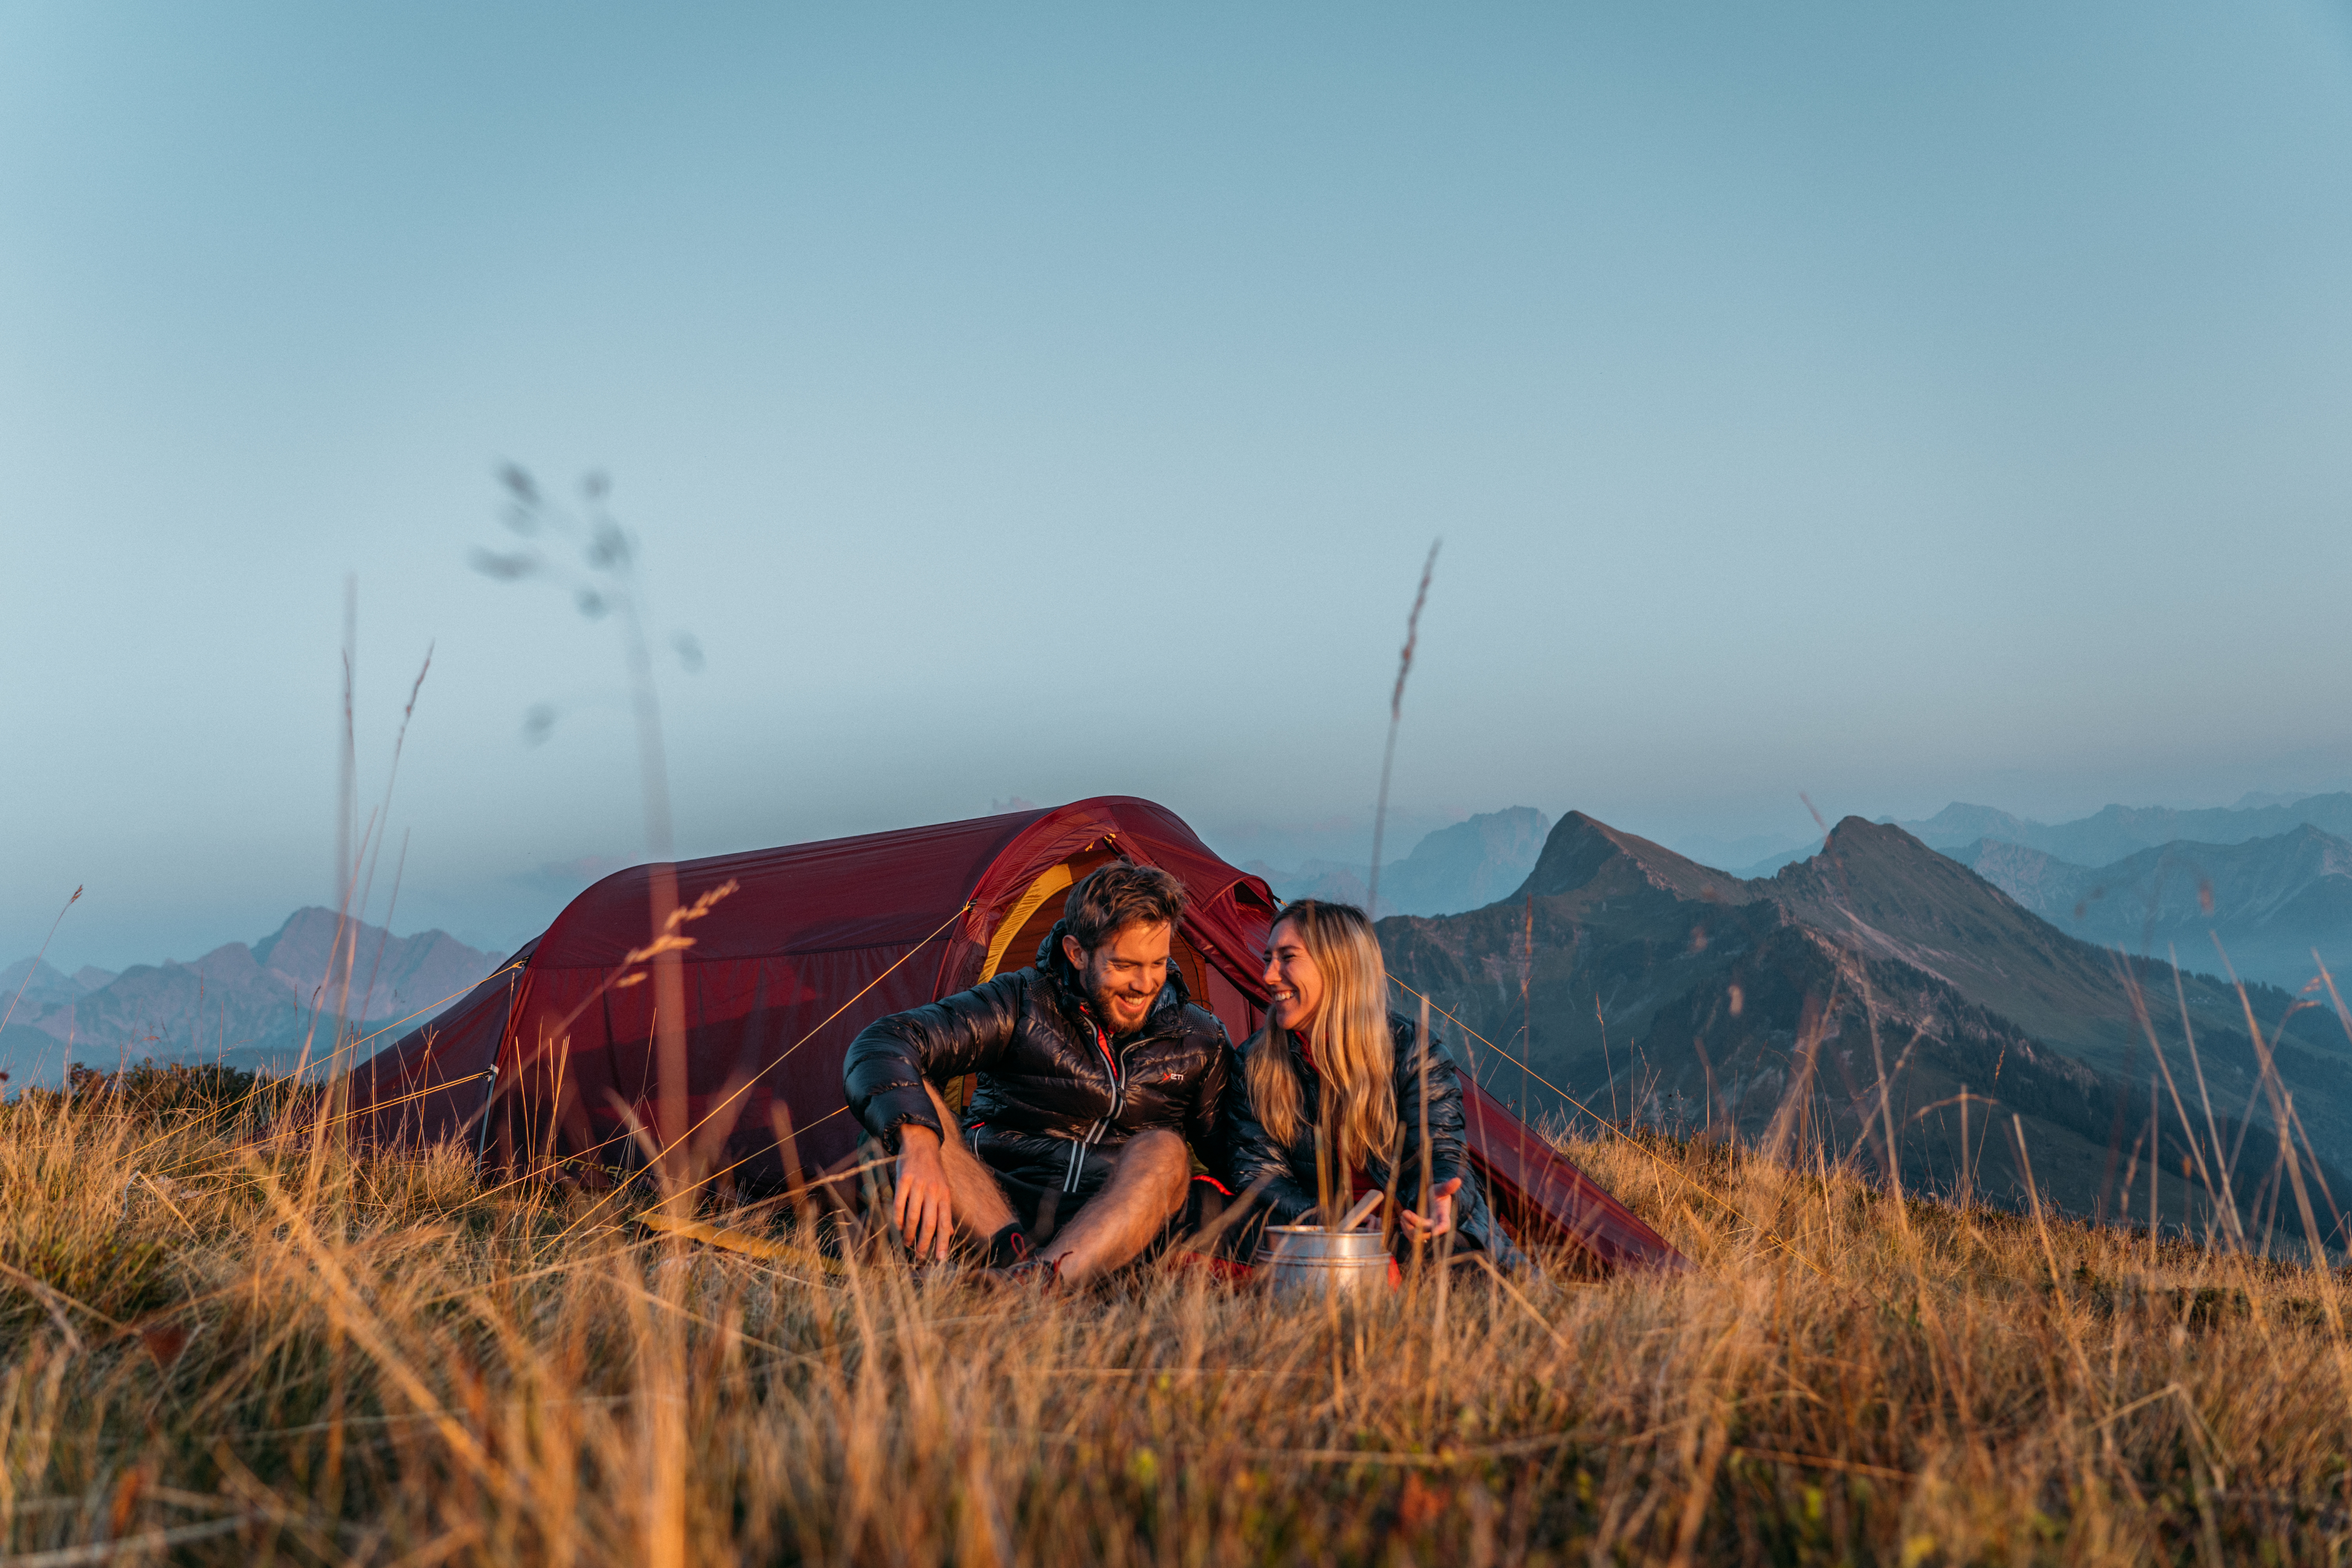 Do you need a tent for backpacking?